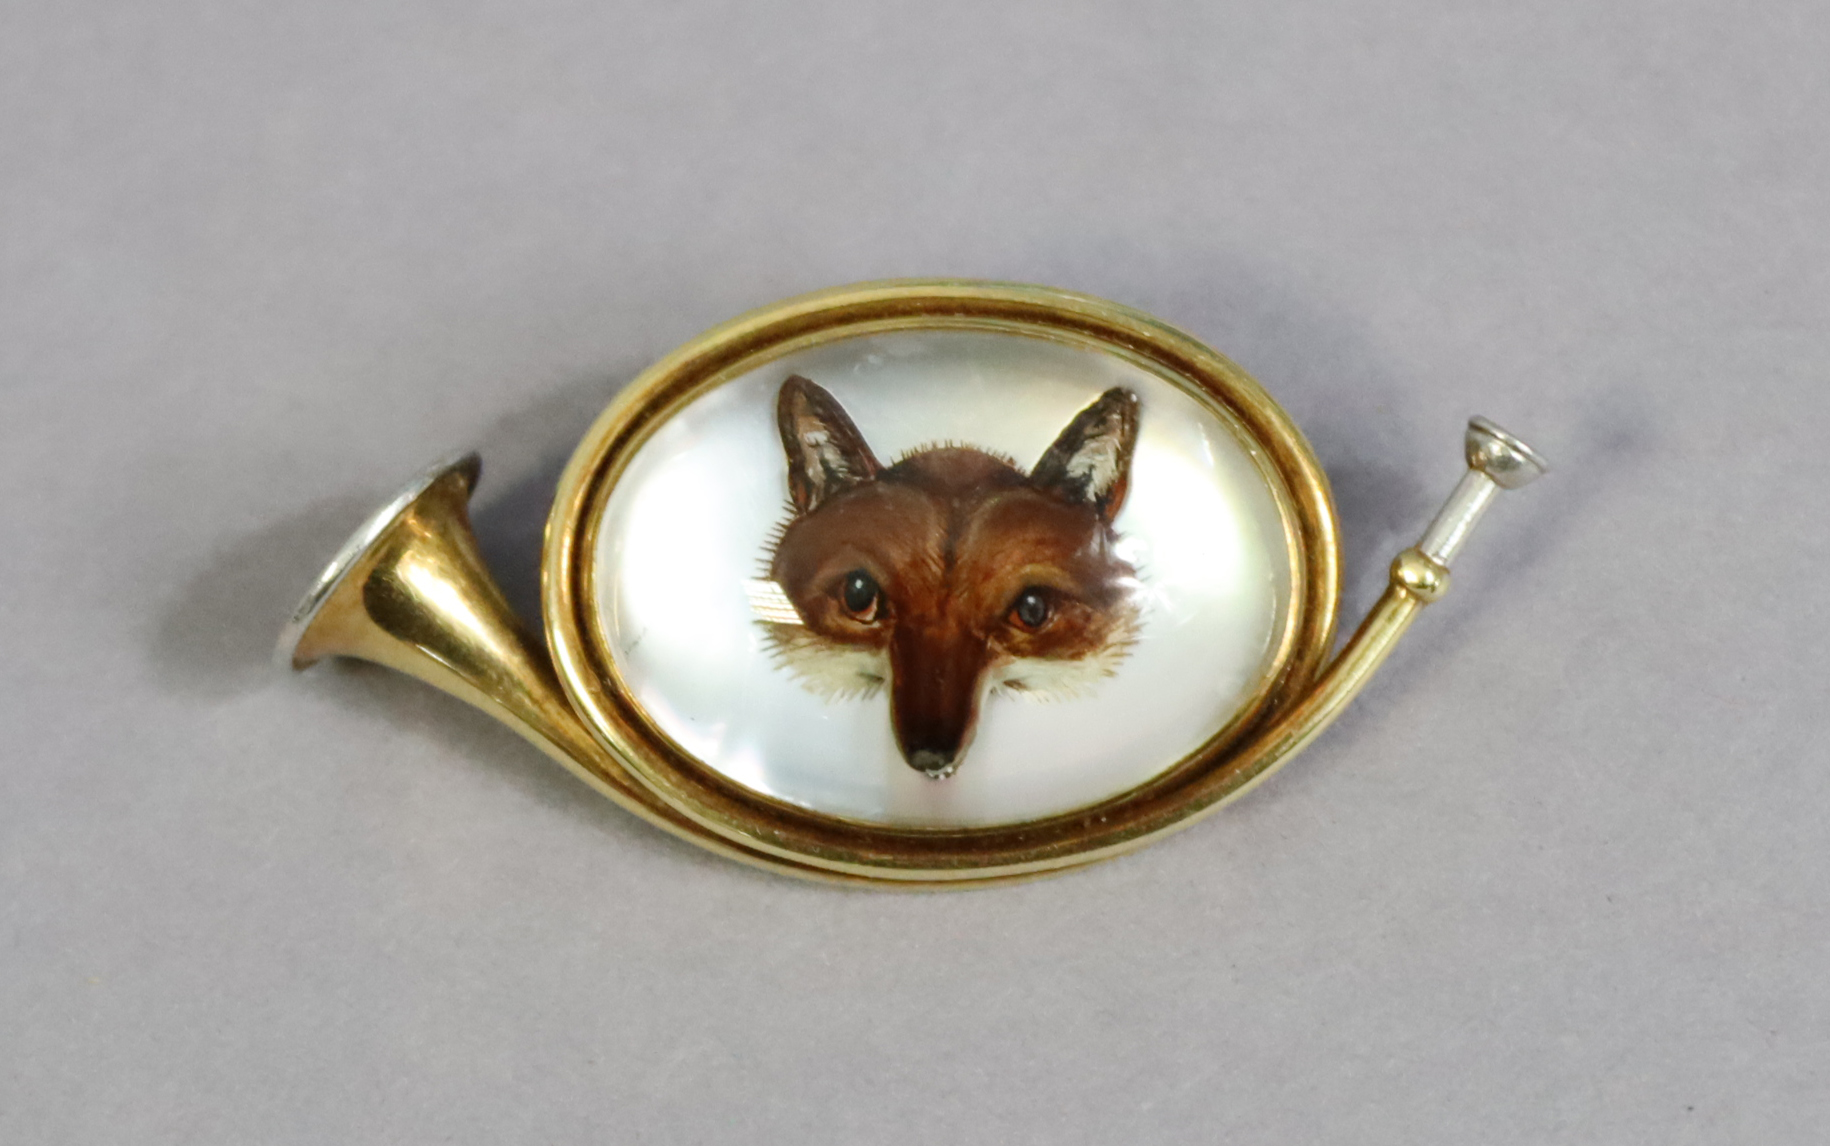 A Tiffany & Co yellow & white-metal novelty hunting horn brooch inset with Essex crystal fox